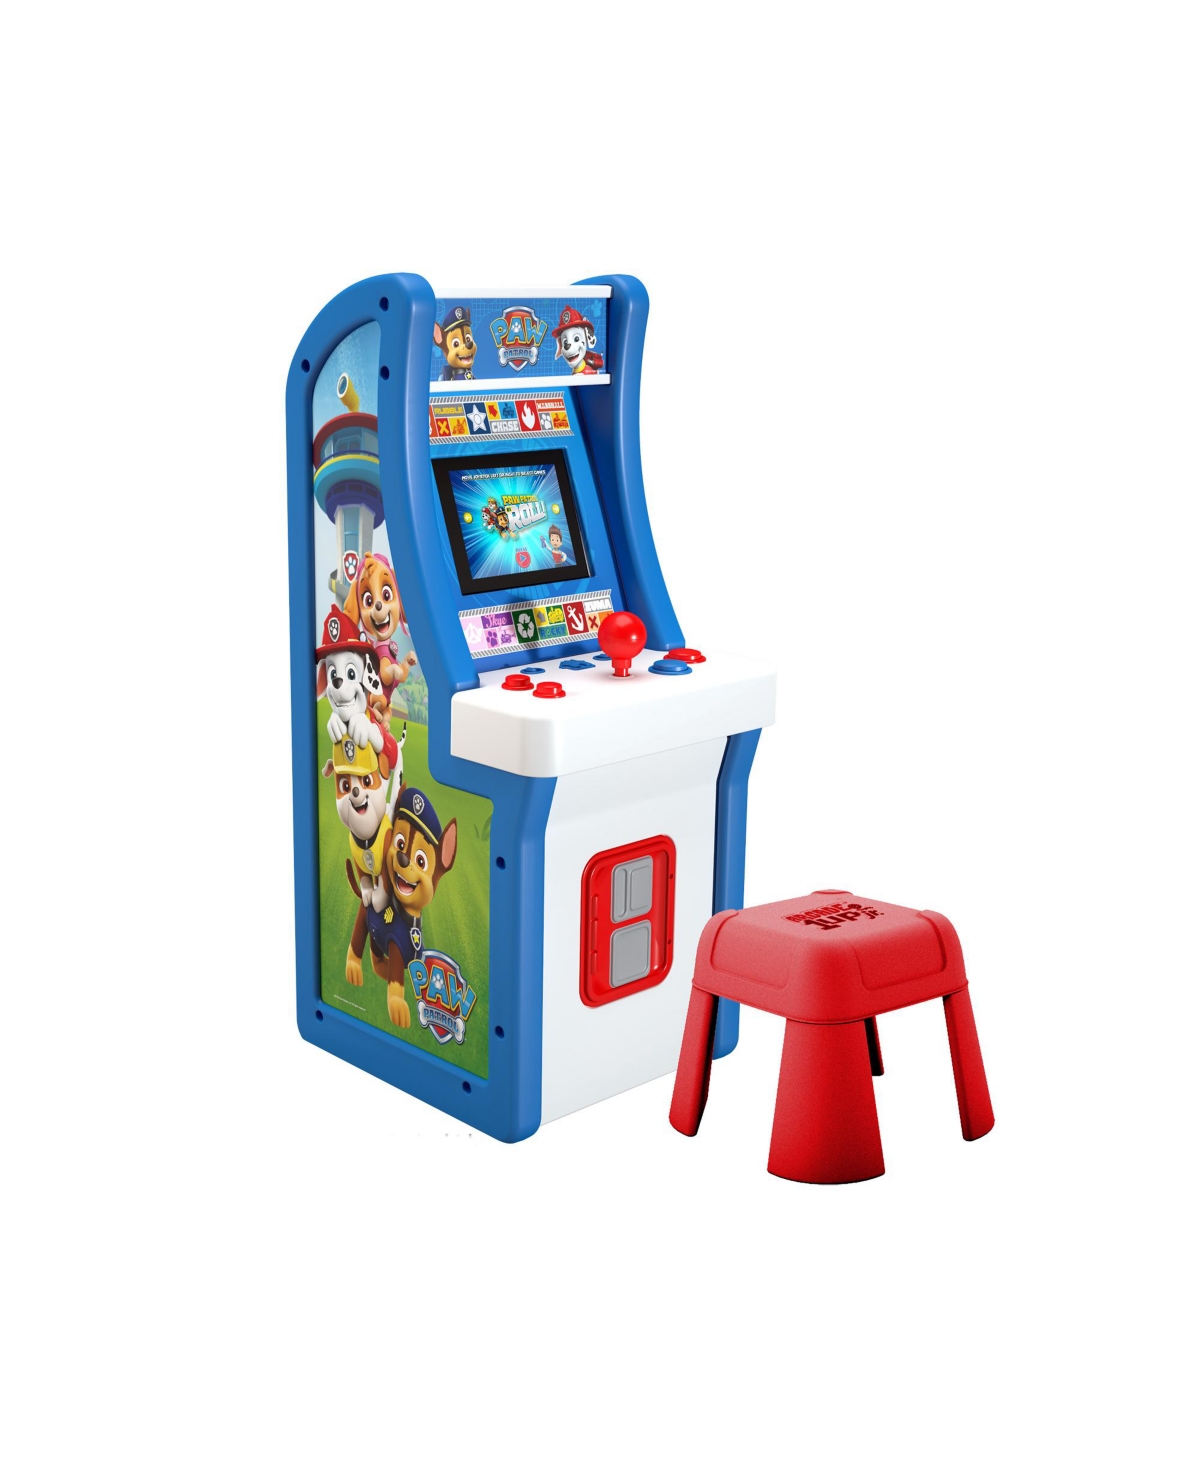 Arcade 1 Up Paw Patrol Jr. Arcade, 4-Player Game, with Stool